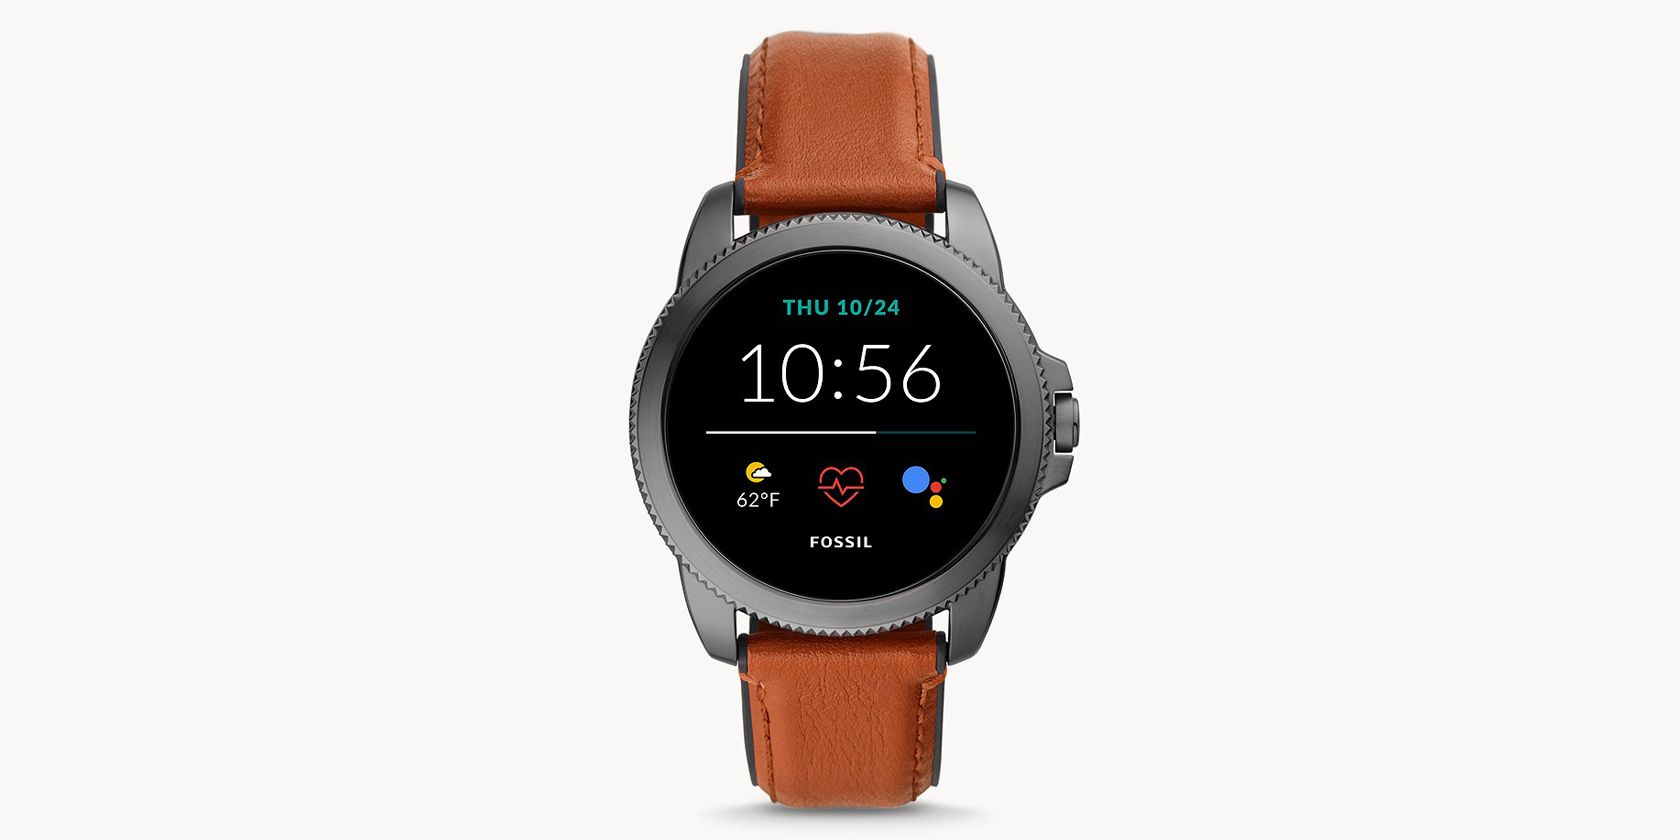 Fossil Gen 5E Is a Wear OS Watch With a Lower Price Than You'd Expect